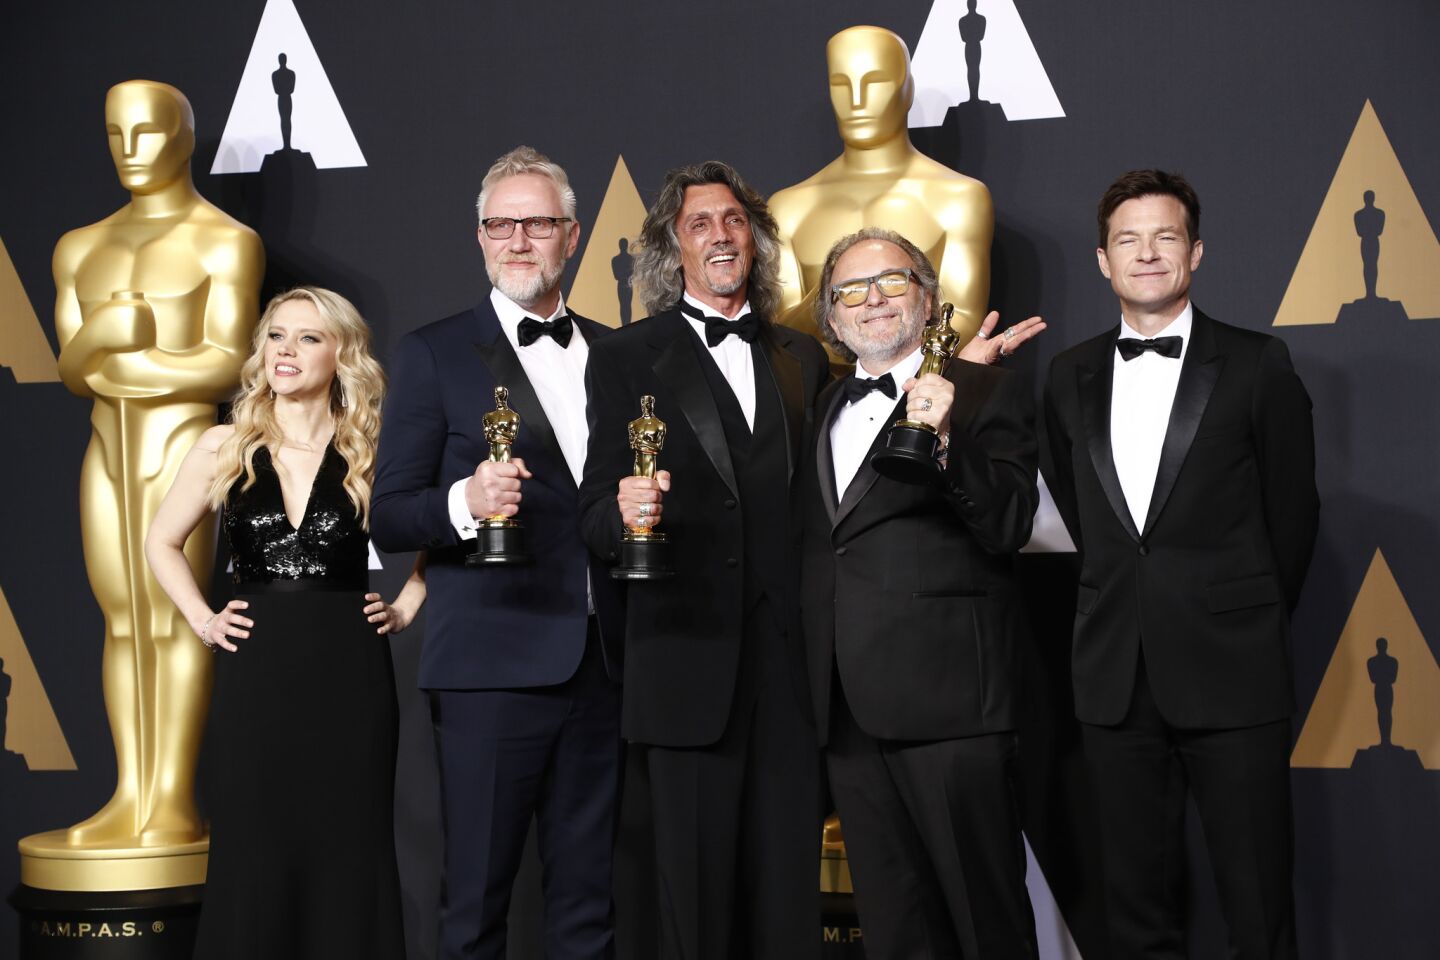 Presenters Kate McKinnon (left) and Jason Bateman (right) flank Christopher Nelson, Giorgio Gregorian and Alessandro Bertolazzi, who won Oscars for makeup and hairstyling.